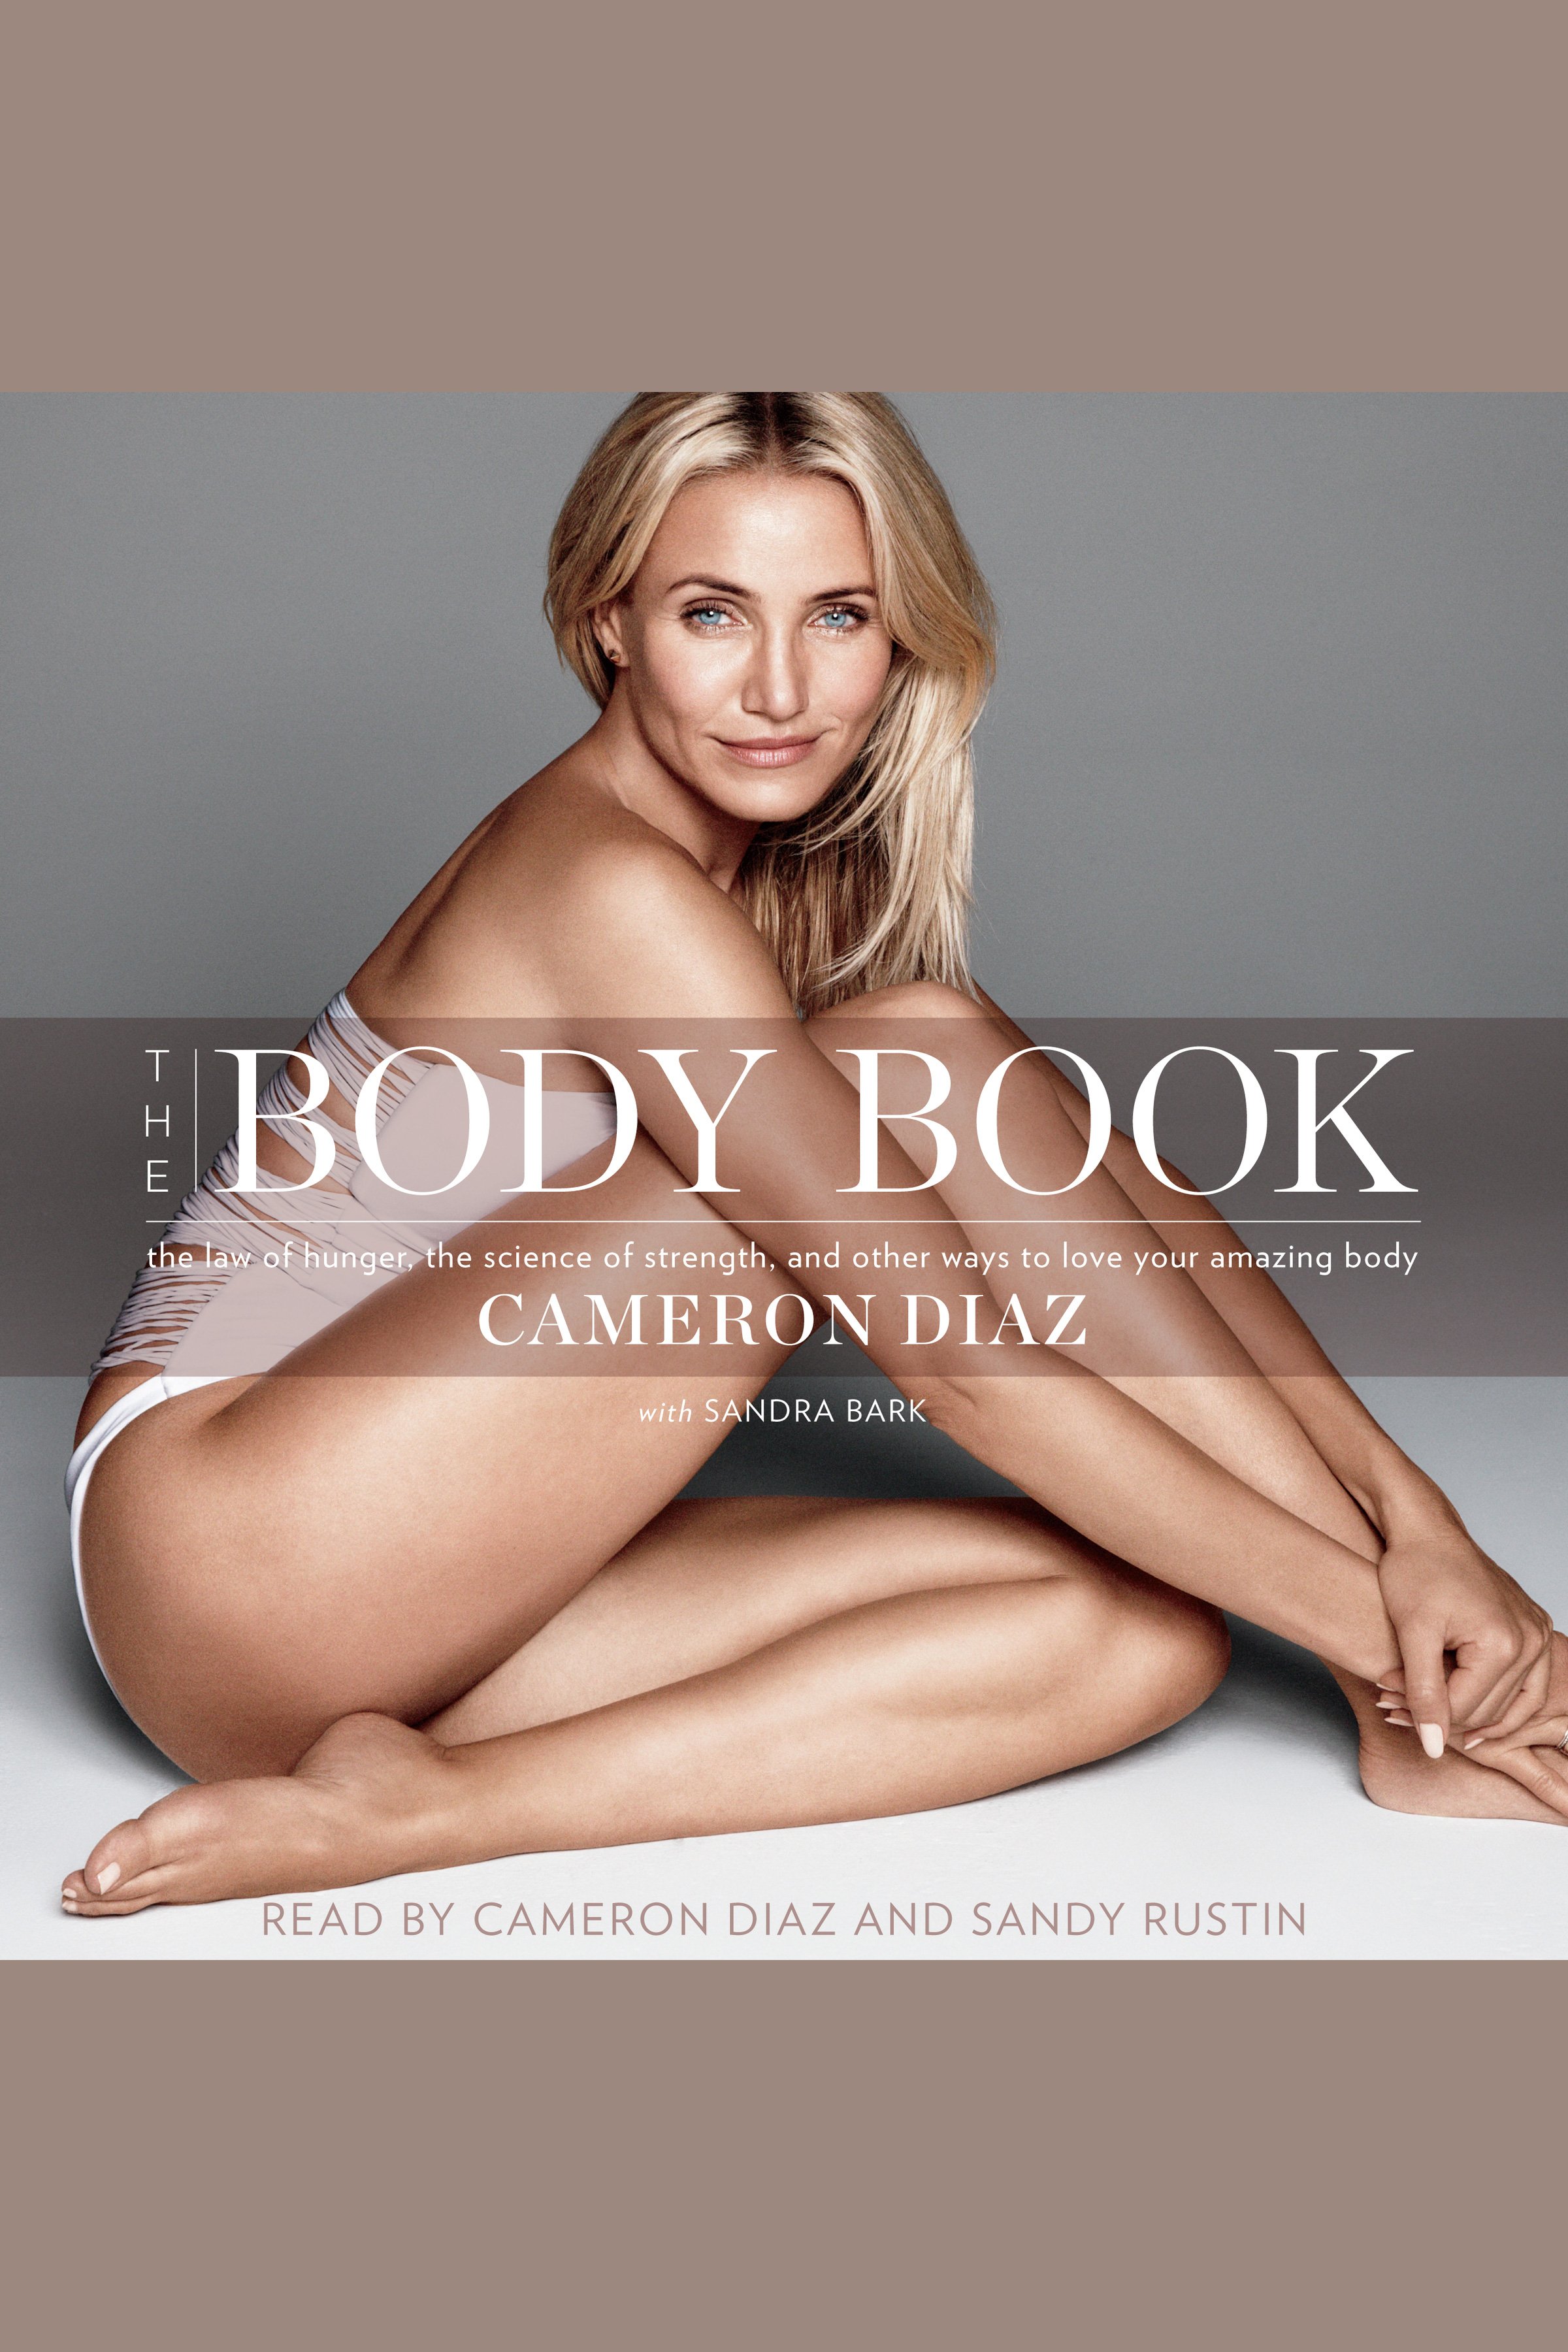 The body book the law of hunger, the science of strength, and other ways to love your amazing body cover image